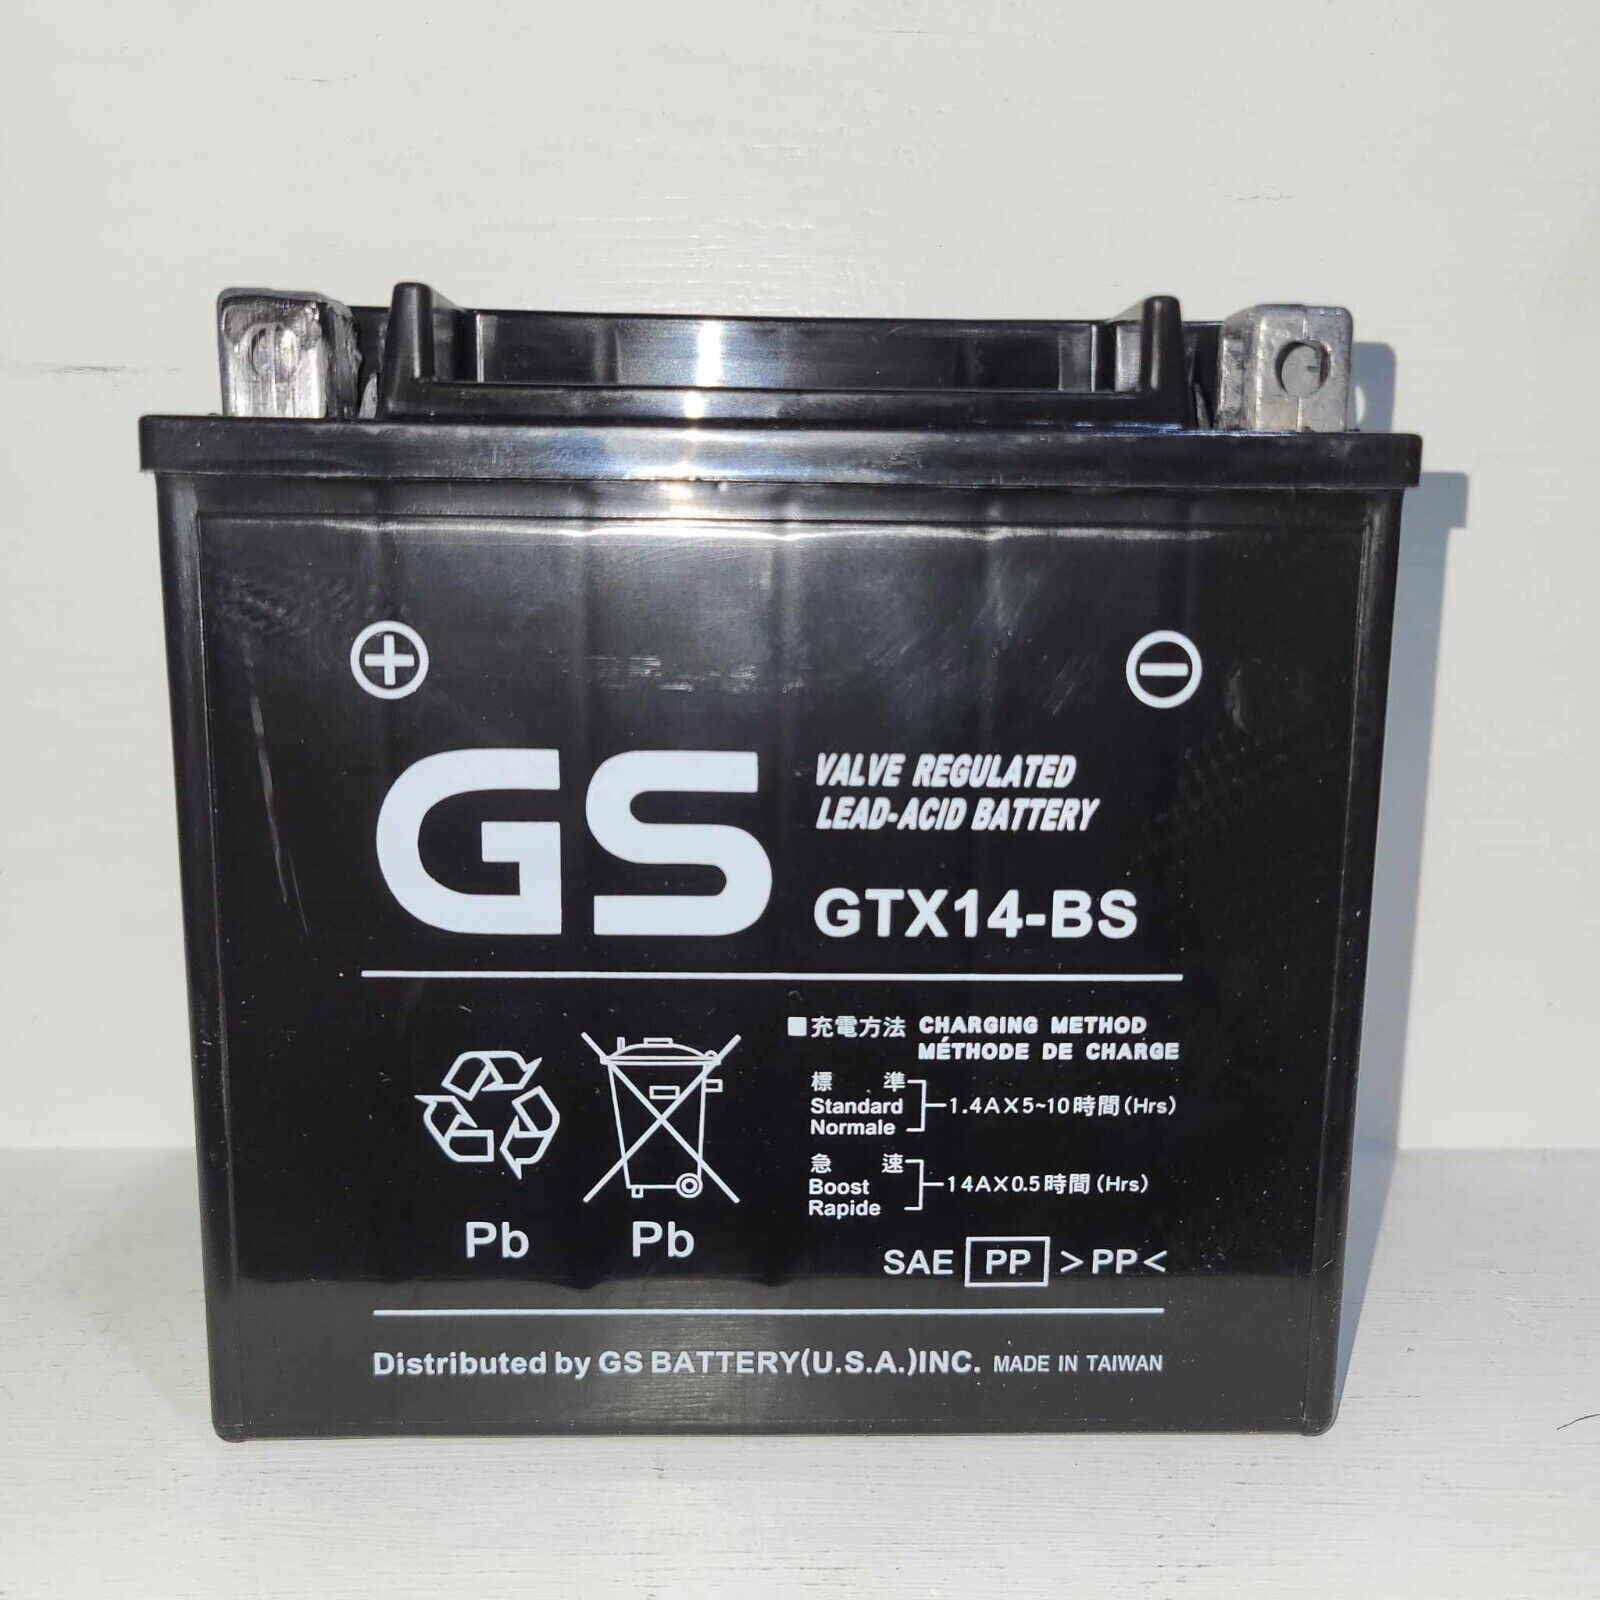 GTX14-BS GS YUASA BATTERY with Hardware Ready for Install AKA YTX14-BS